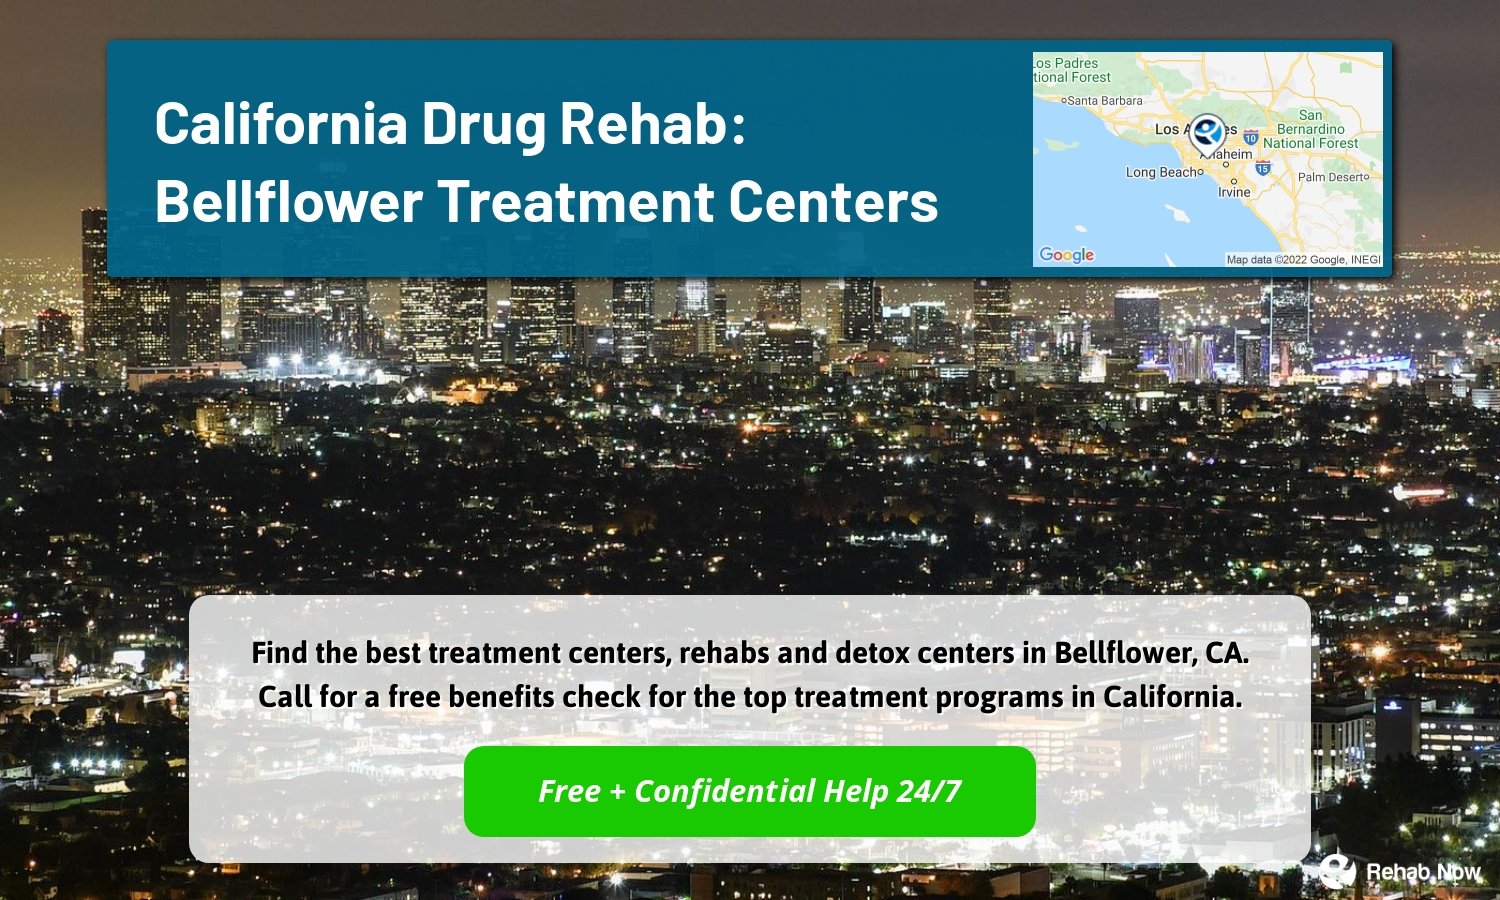 Find the best treatment centers, rehabs and detox centers in Bellflower, CA. Call for a free benefits check for the top treatment programs in California.